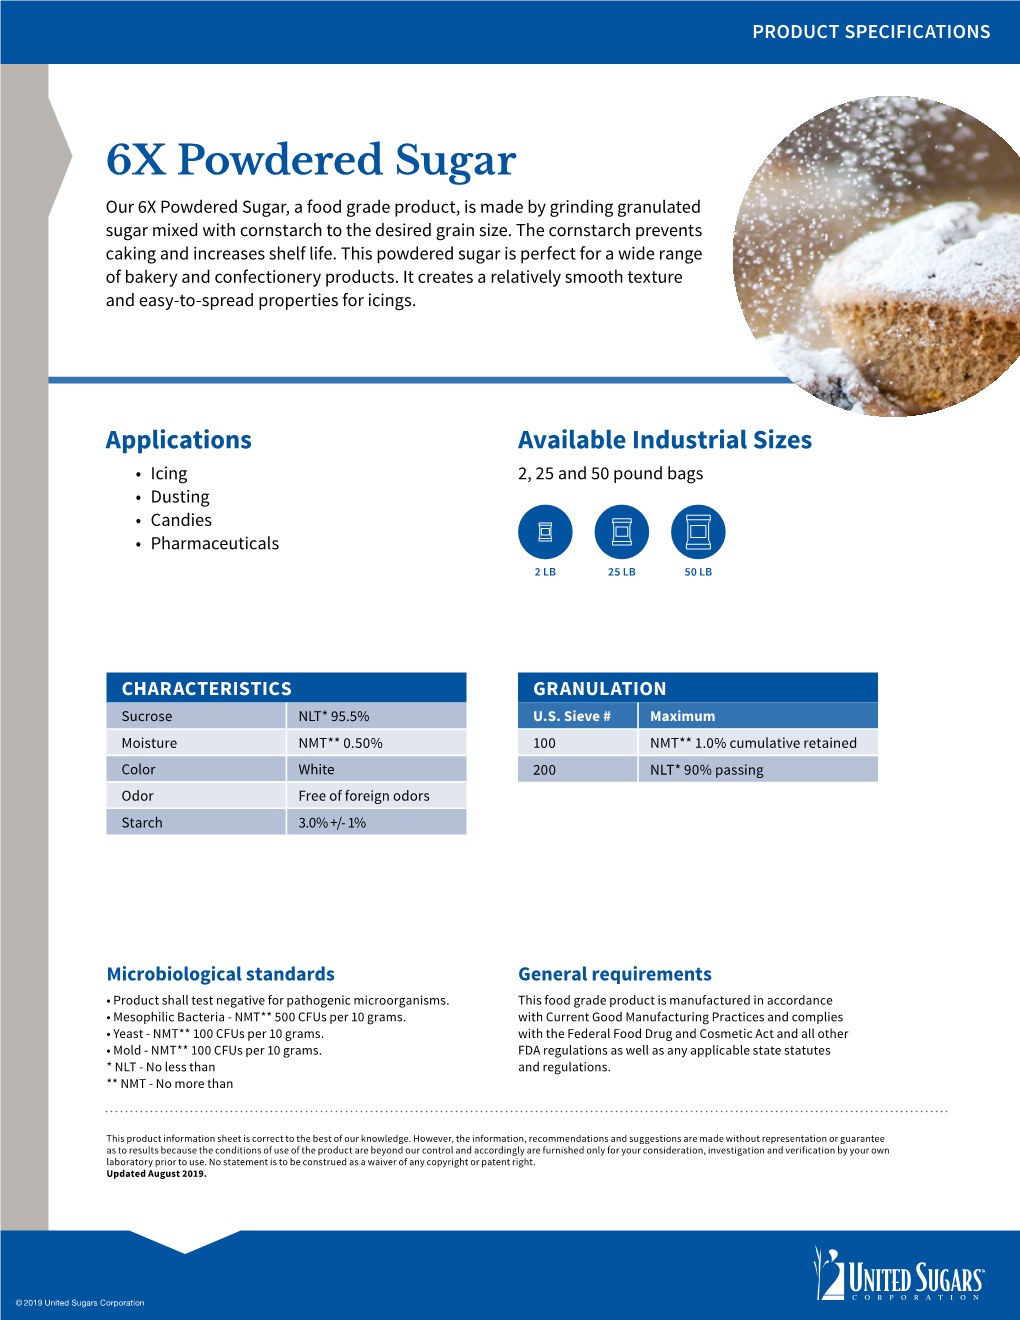 6X Powdered Sugar Our 6X Powdered Sugar, a Food Grade Product, Is Made by Grinding Granulated Sugar Mixed with Cornstarch to the Desired Grain Size